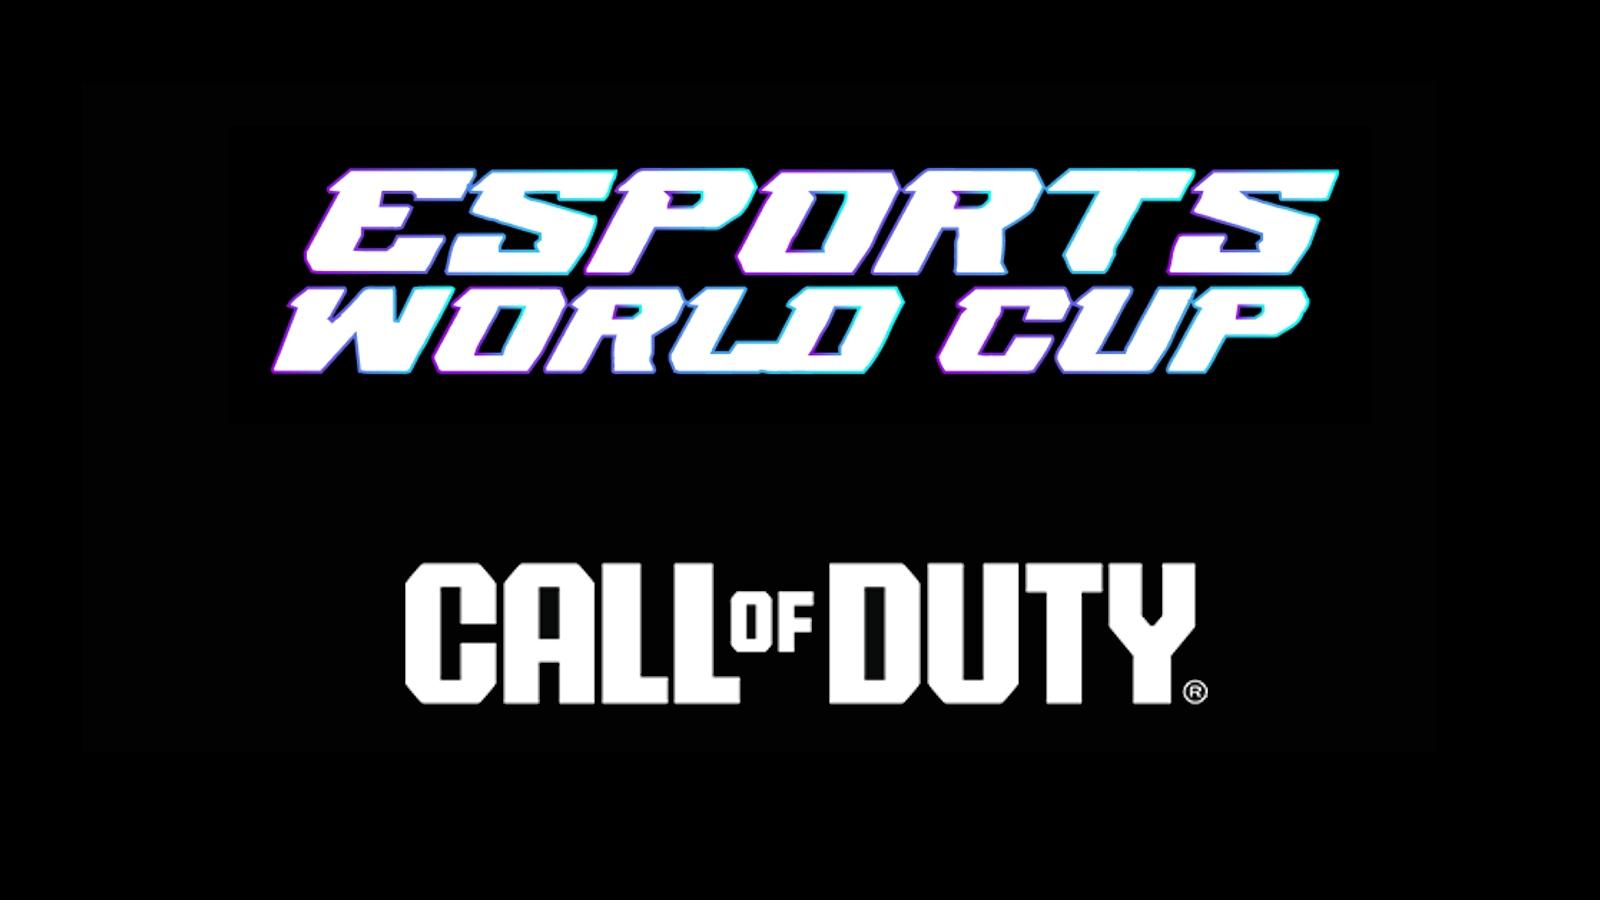 Esports World Cup and Call of Duty logos